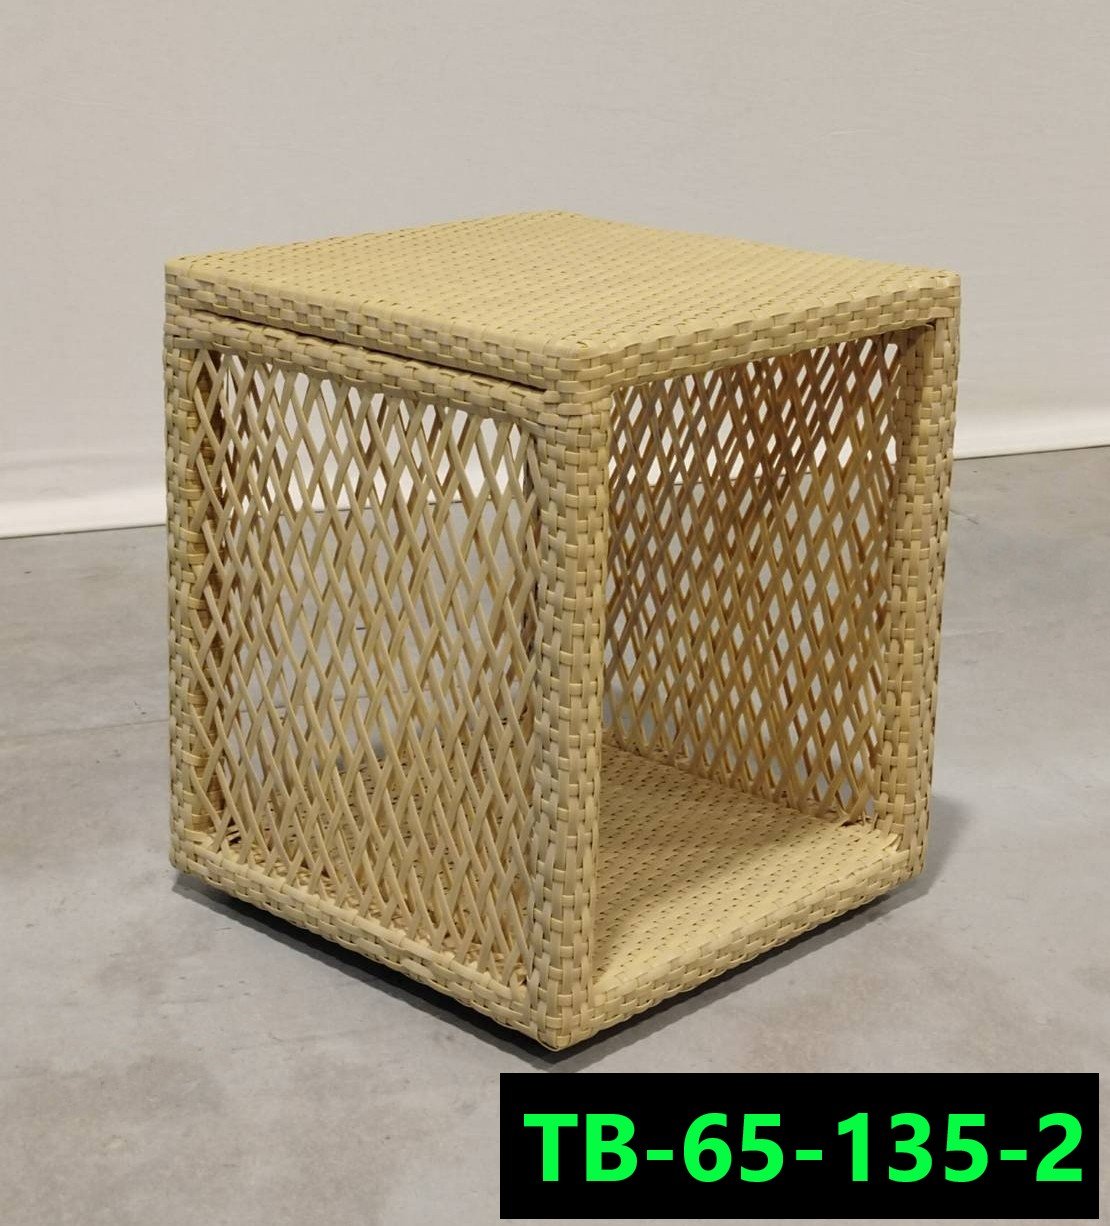 Rattan Table Product code TB-65-135-2